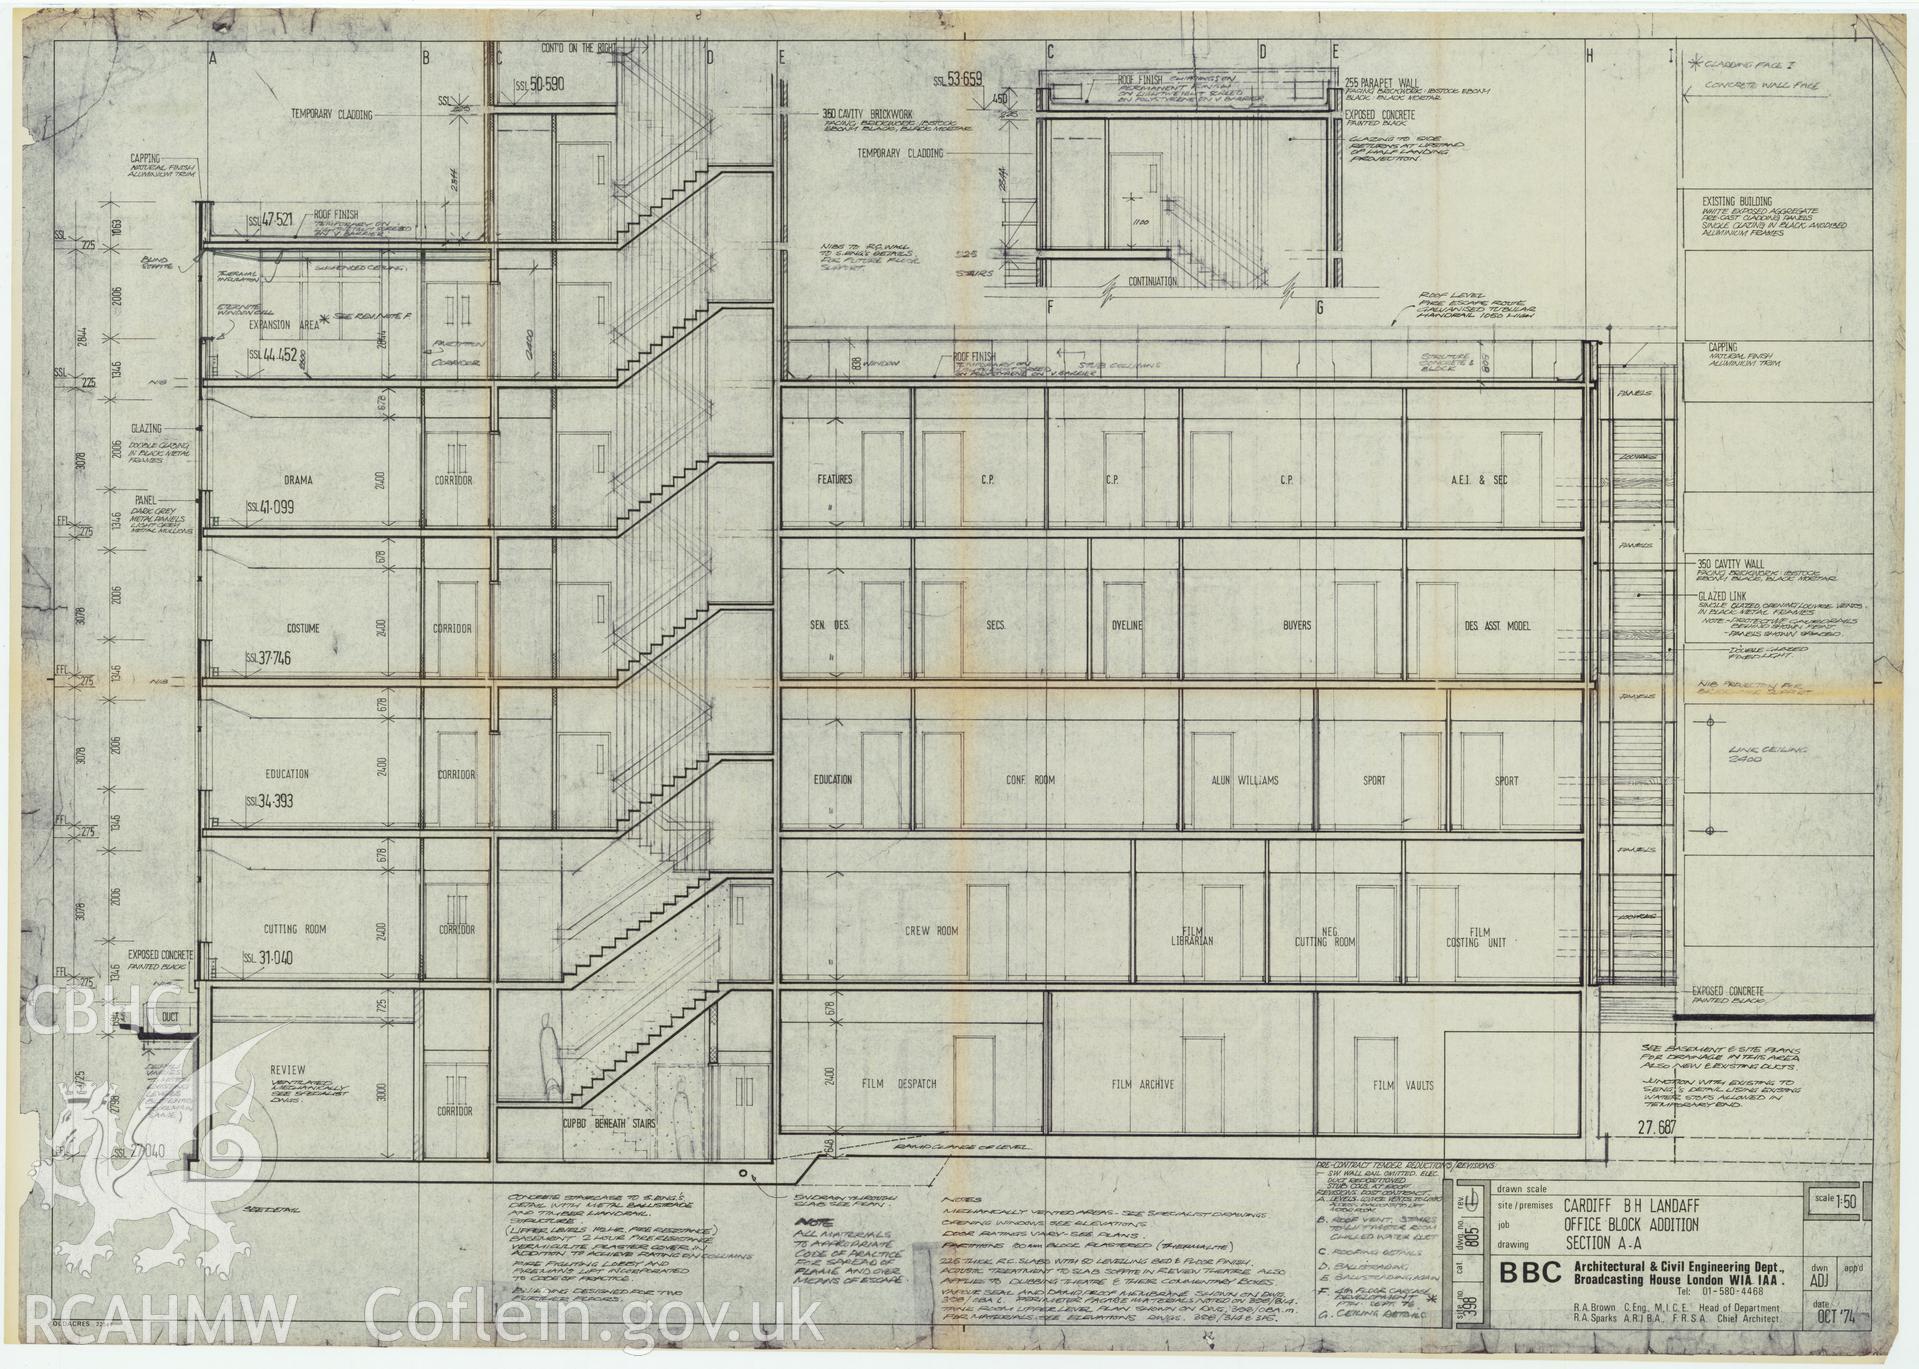 Digitised drawing plan of Llandaff office block addition, Cardiff. Drawing no. 805G section A-A, October 1974.